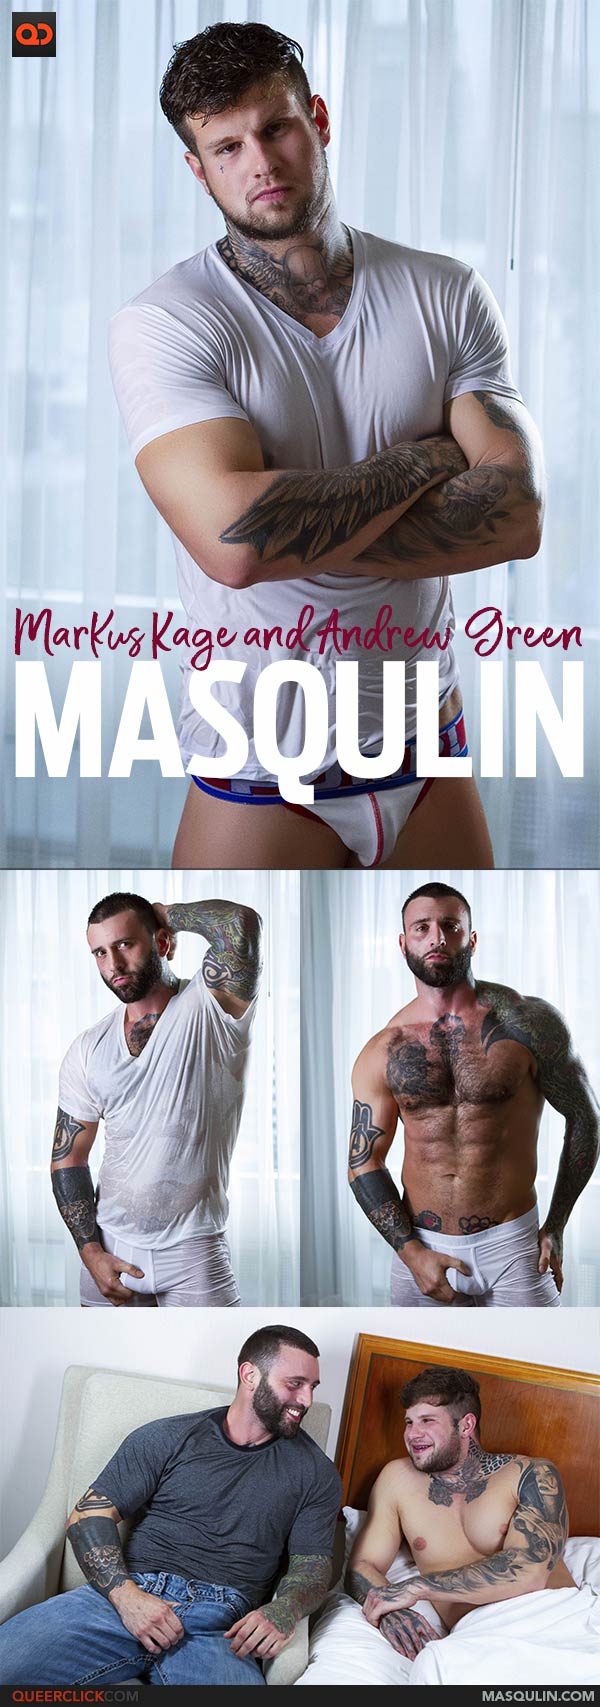 Masqulin: Markus Kage and Andrew Green